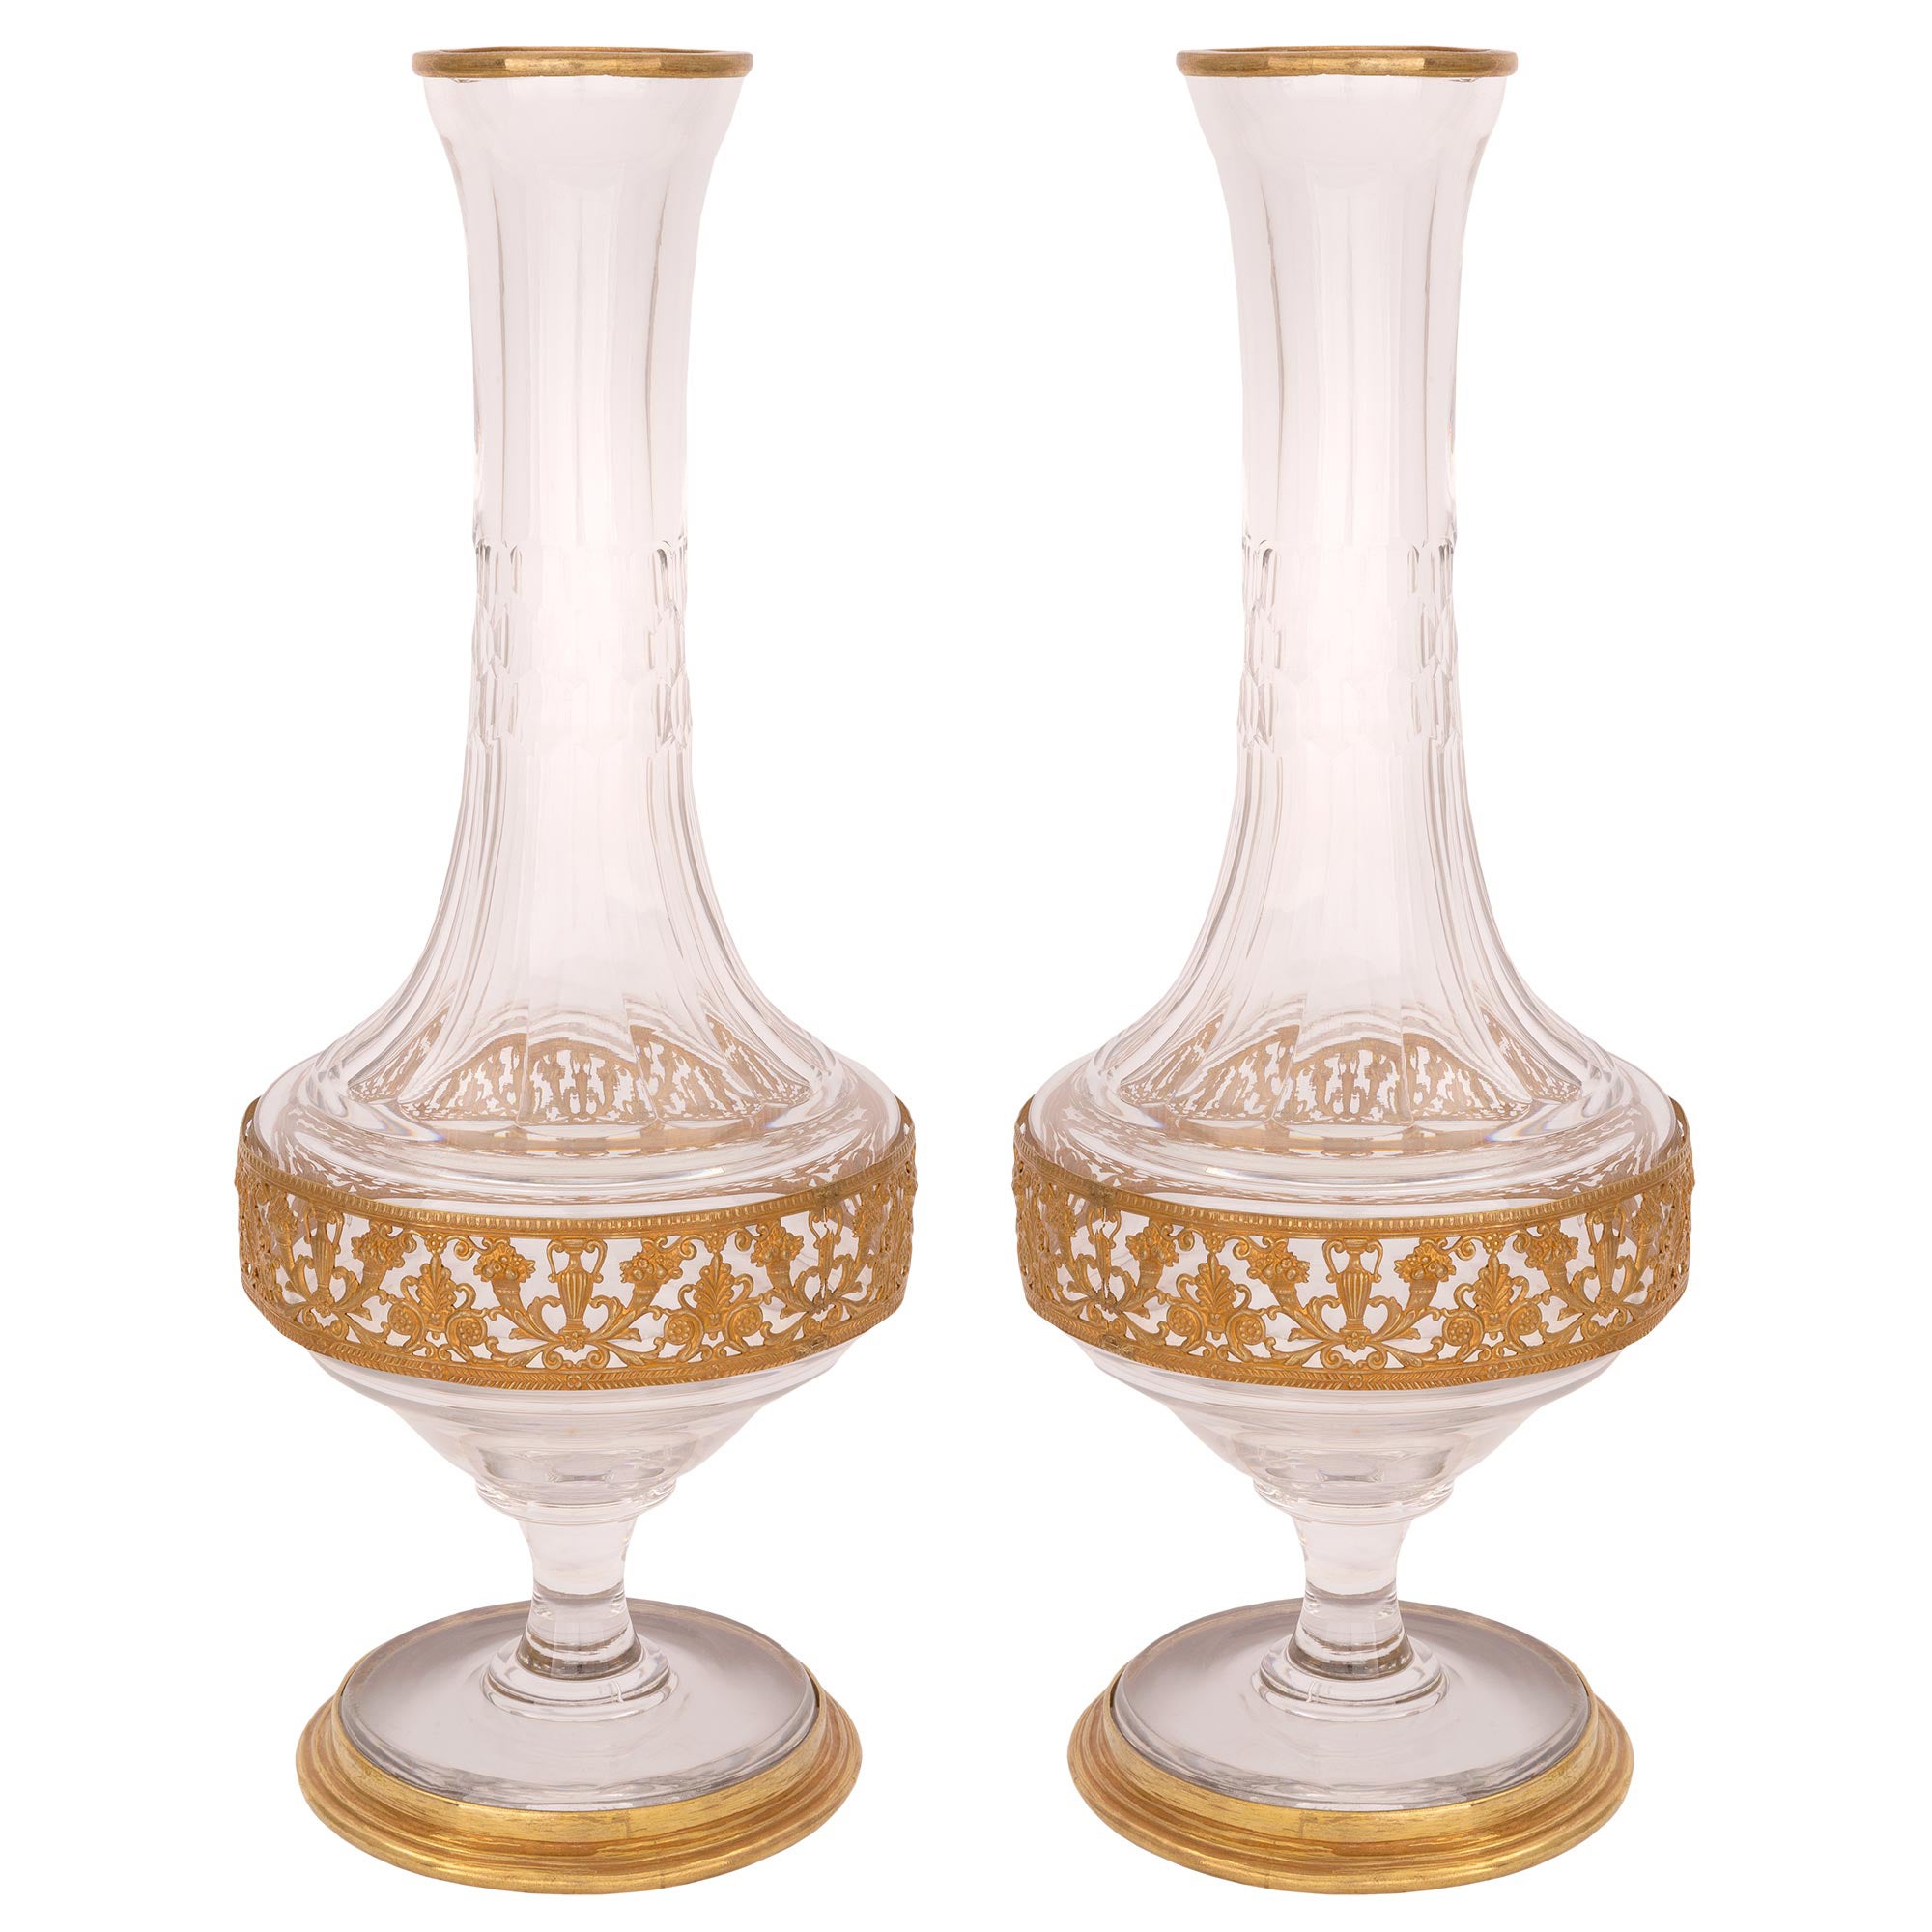 Pair of French 19th Century Louis XVI Style Baccarat Crystal and Ormolu Vases For Sale